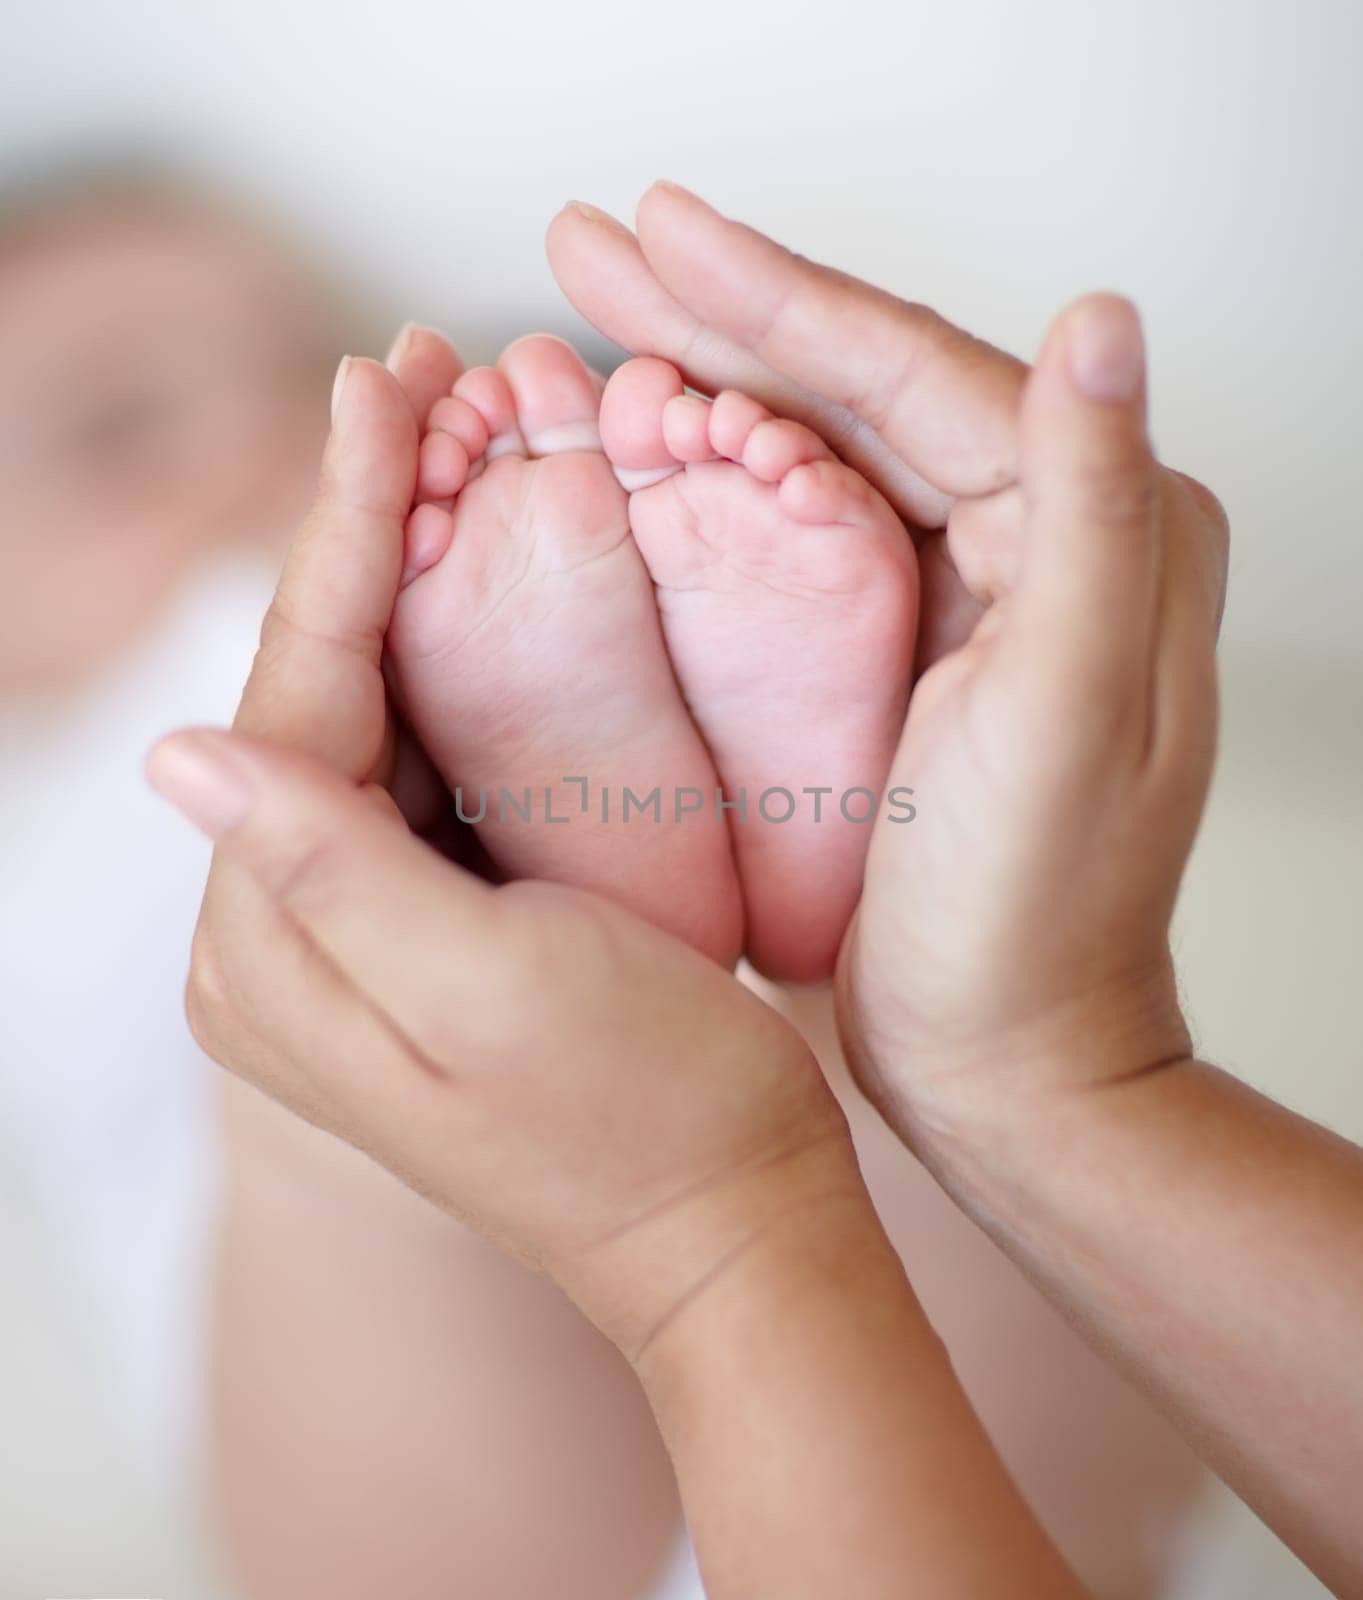 Love, mother and hands with newborn or feet for development, nurture and bonding in nursery of apartment. Family, woman or baby toes with trust, support or care for relationship or motherhood in home.